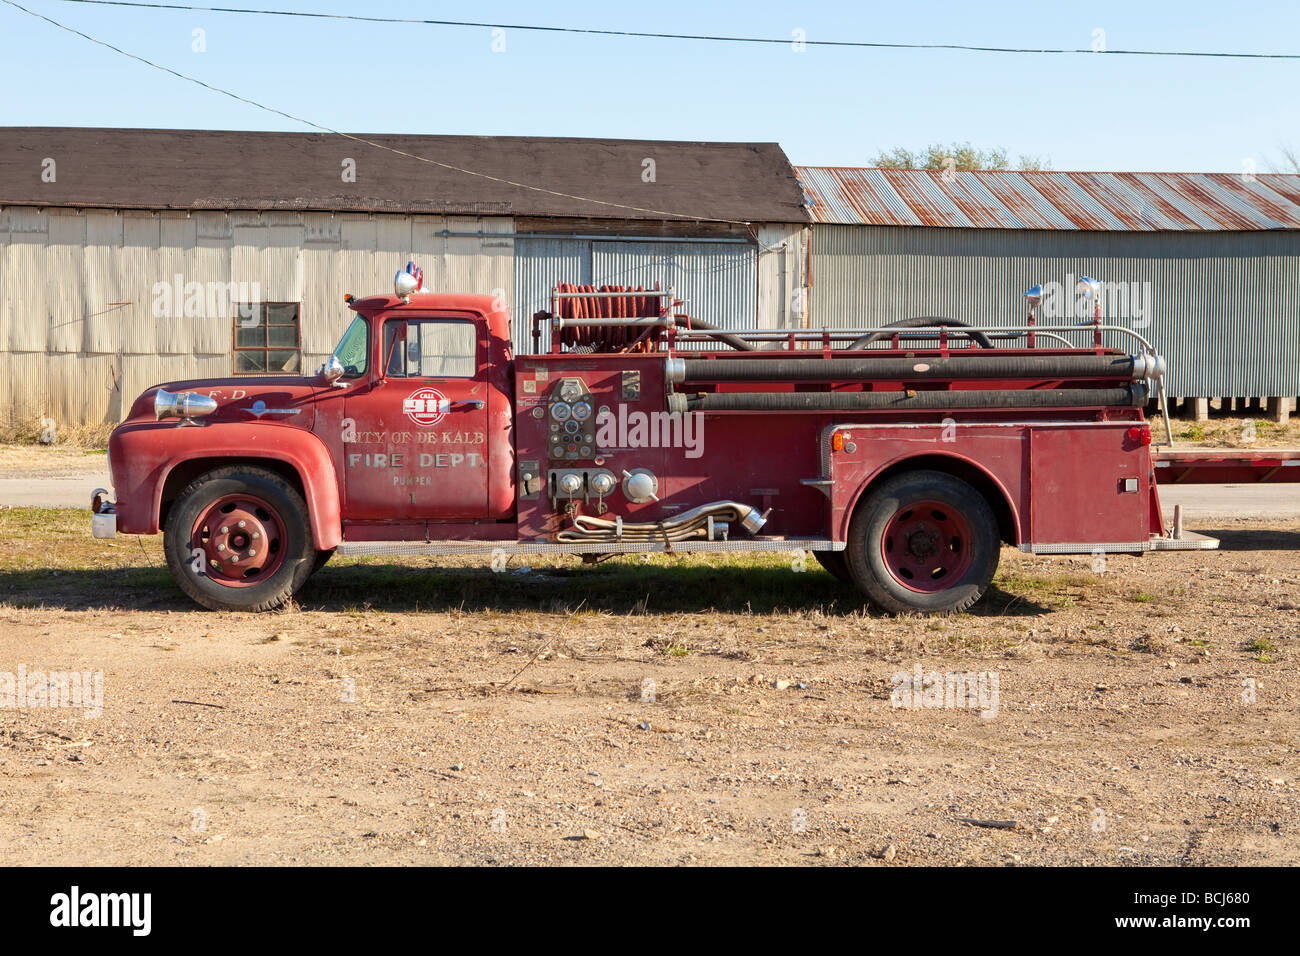 Fire truck fire engine parked in field with metal corrugated buildings in background Profile view De Kalb Texas USA Stock Photo